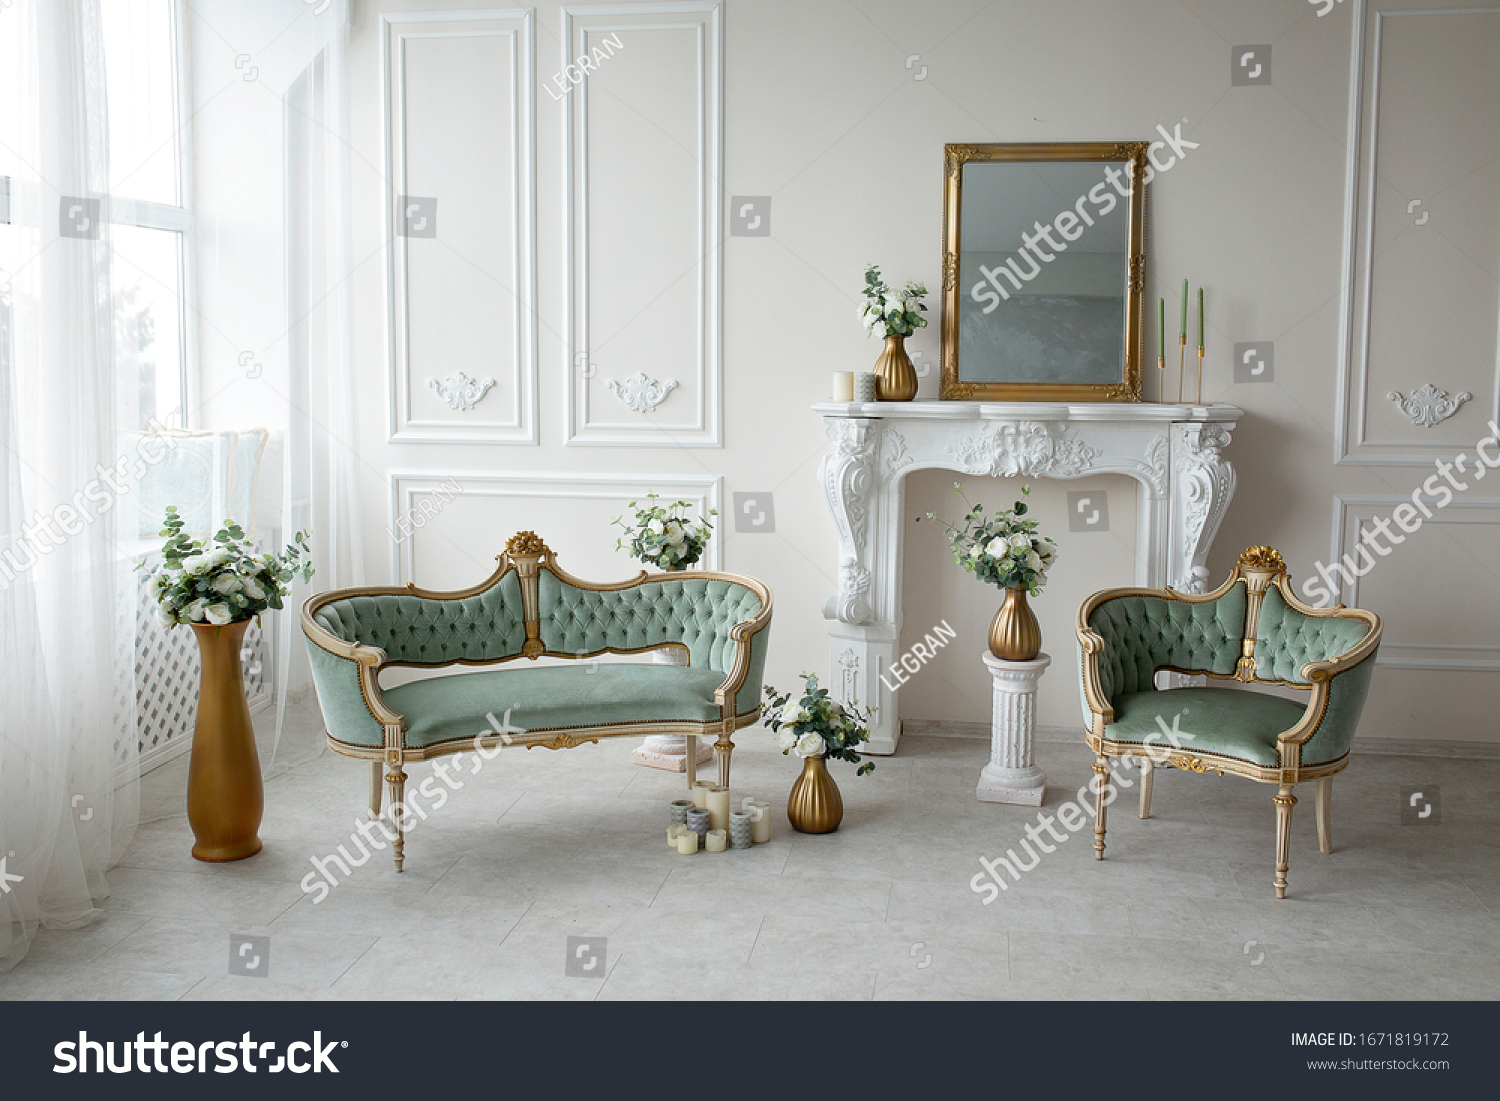 Vintage green armchairs in the interior near the fireplace #1671819172